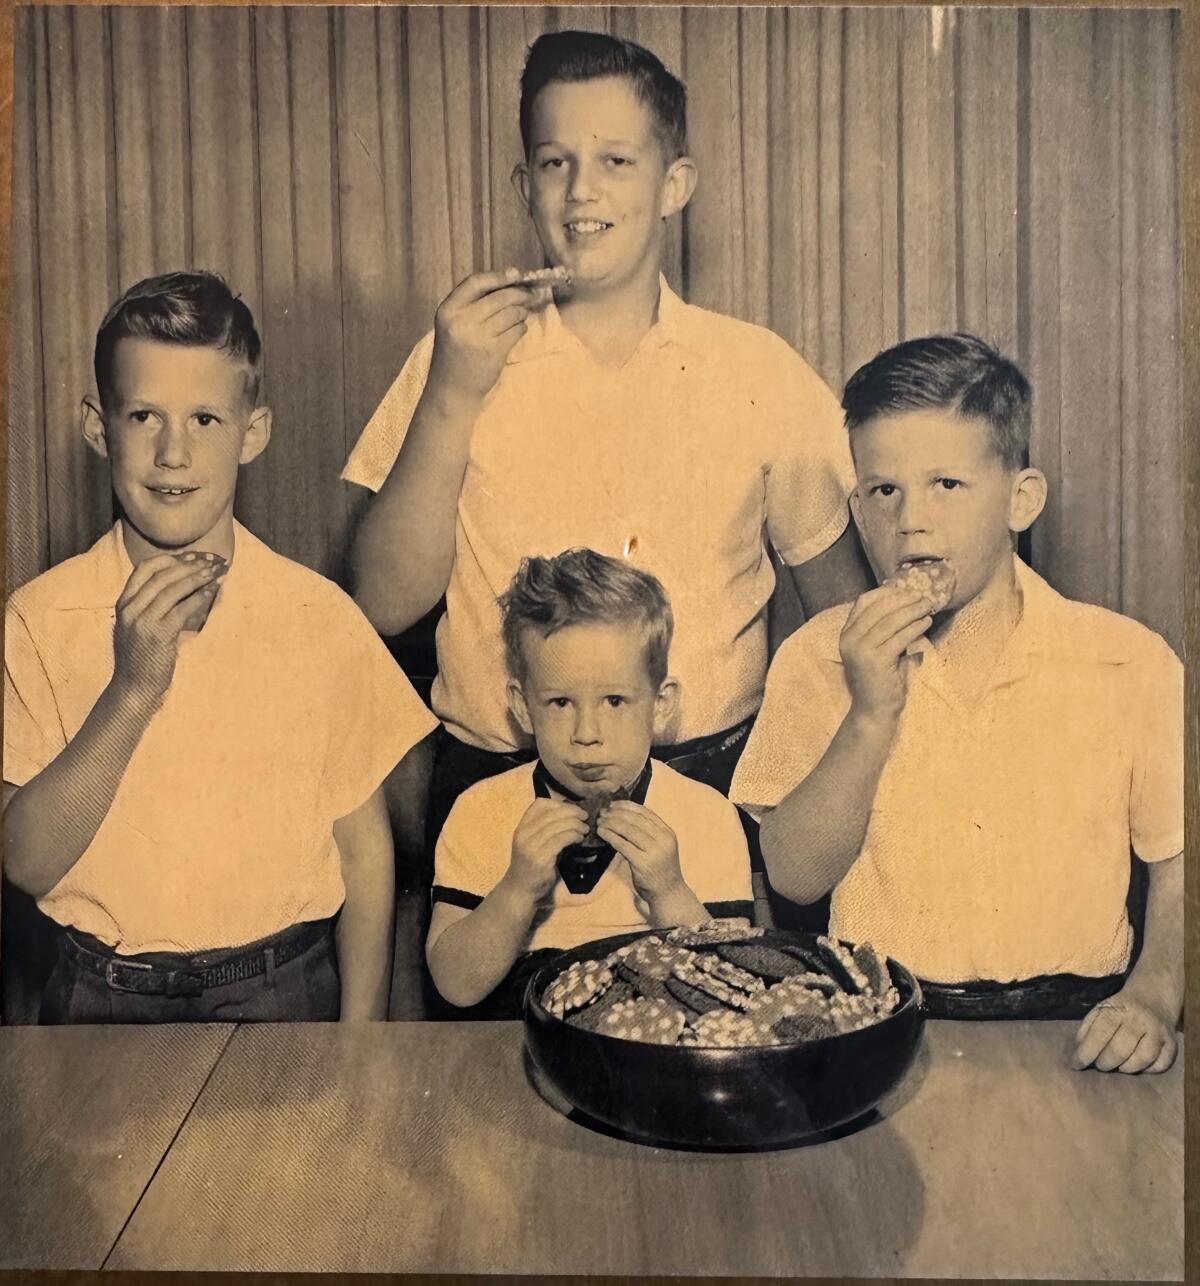 A vintage photo of grandsons of Laura Scudder enjoying cookies made from Laura Scudder peanut butter.